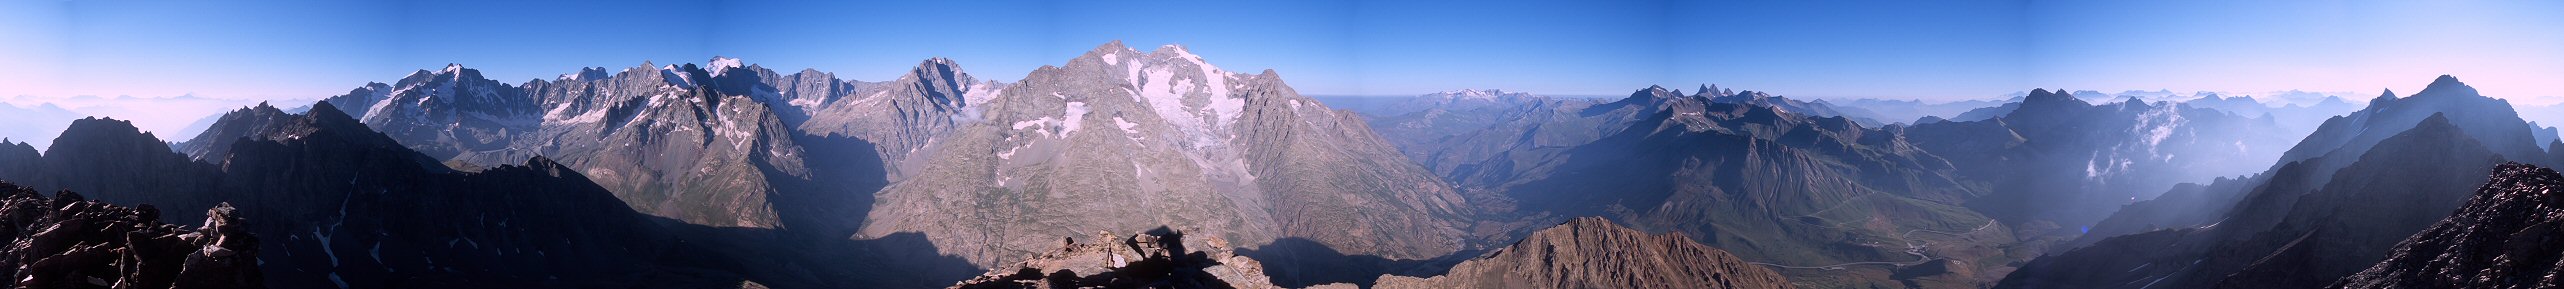 [Bivouac_Pano.jpg]
Panorama of the Ecrins Range from Roc Noir de Combeynot, above the Lautaret pass. From left to right: Briançon down in the Guisane valley, the Pelvoux (3943m), la Barre des Ecrins (4102m), la Meije, Villar d'Arene down in the Romanche Valley, the Lautaret pass, Italy in the background and the ridge of the Roc Noir de Combeynot.